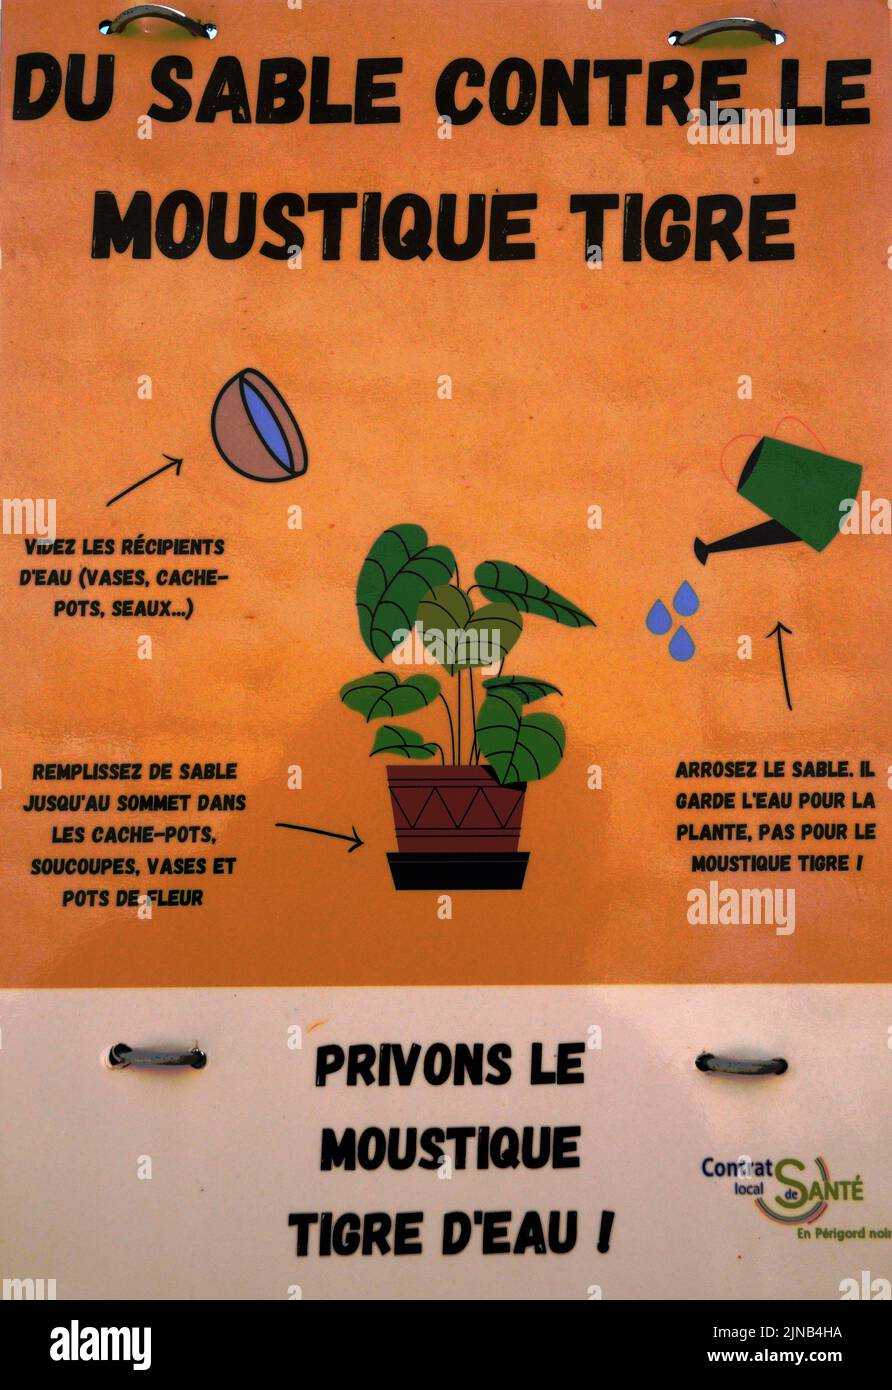 Information posters warning the French people of the dangers of the Tiger Mosquito. It offers advice on control and warns of potential diseases. Stock Photo